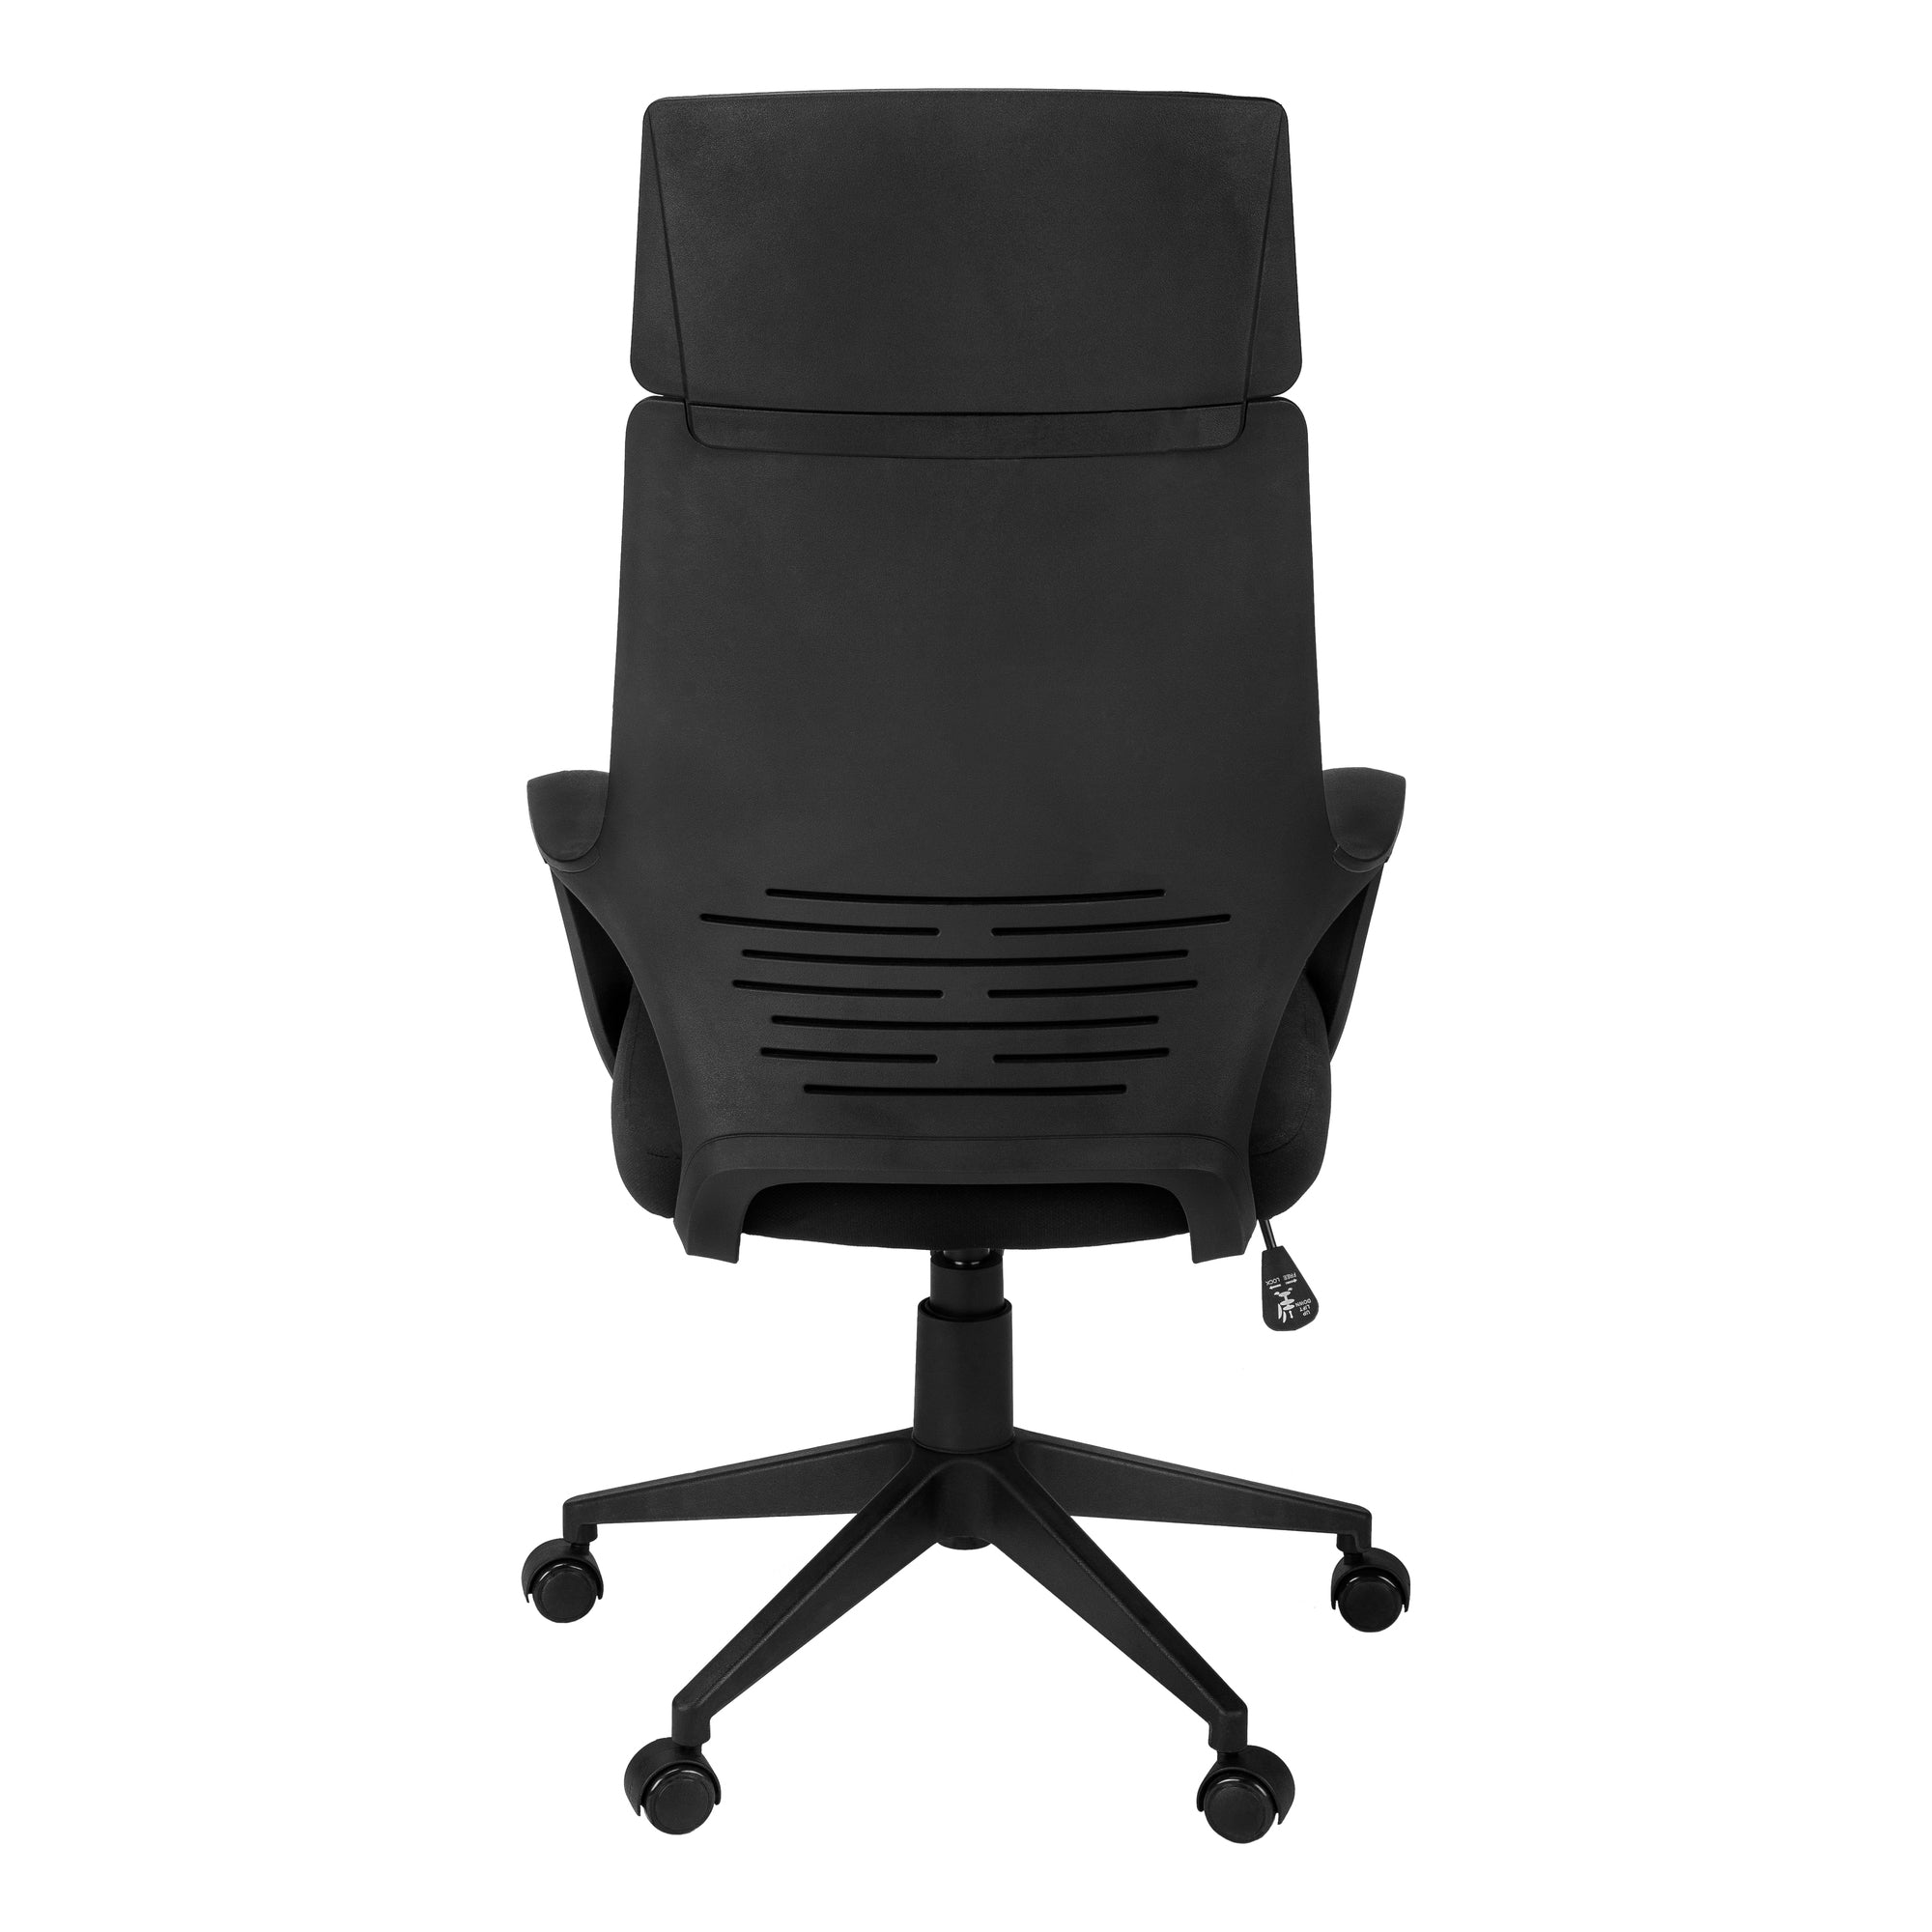 Gray Fabric Tufted Seat Swivel Adjustable Executive Chair Fabric Back Plastic Frame - Tuesday Morning-Office Chairs